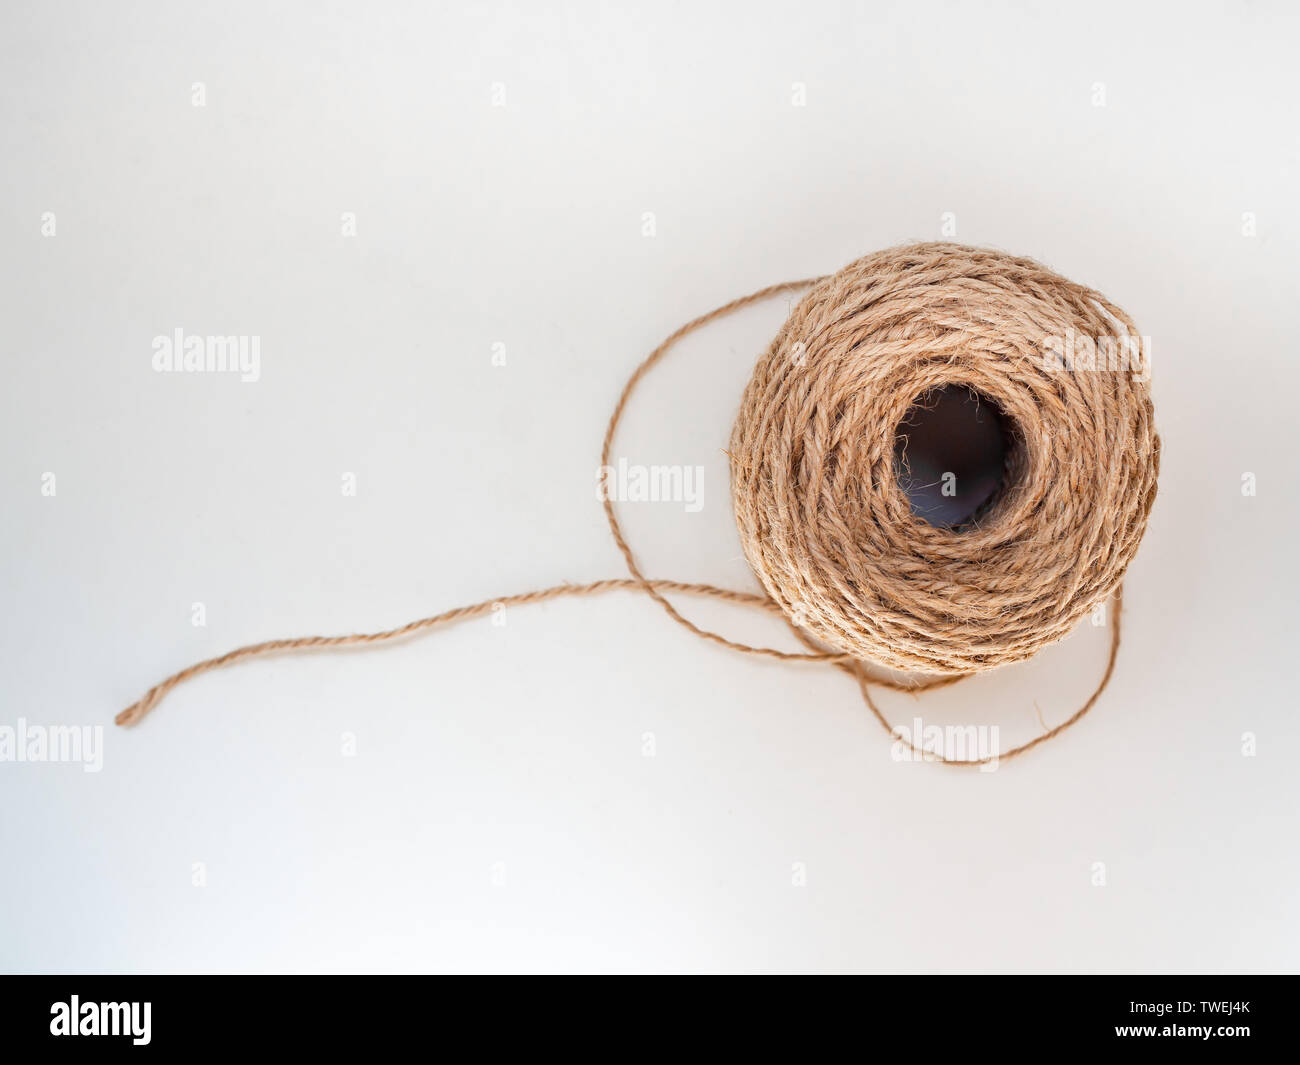 https://c8.alamy.com/comp/TWEJ4K/skein-of-jute-twine-isolated-on-white-background-with-copy-space-roll-of-natural-jute-rope-top-view-TWEJ4K.jpg